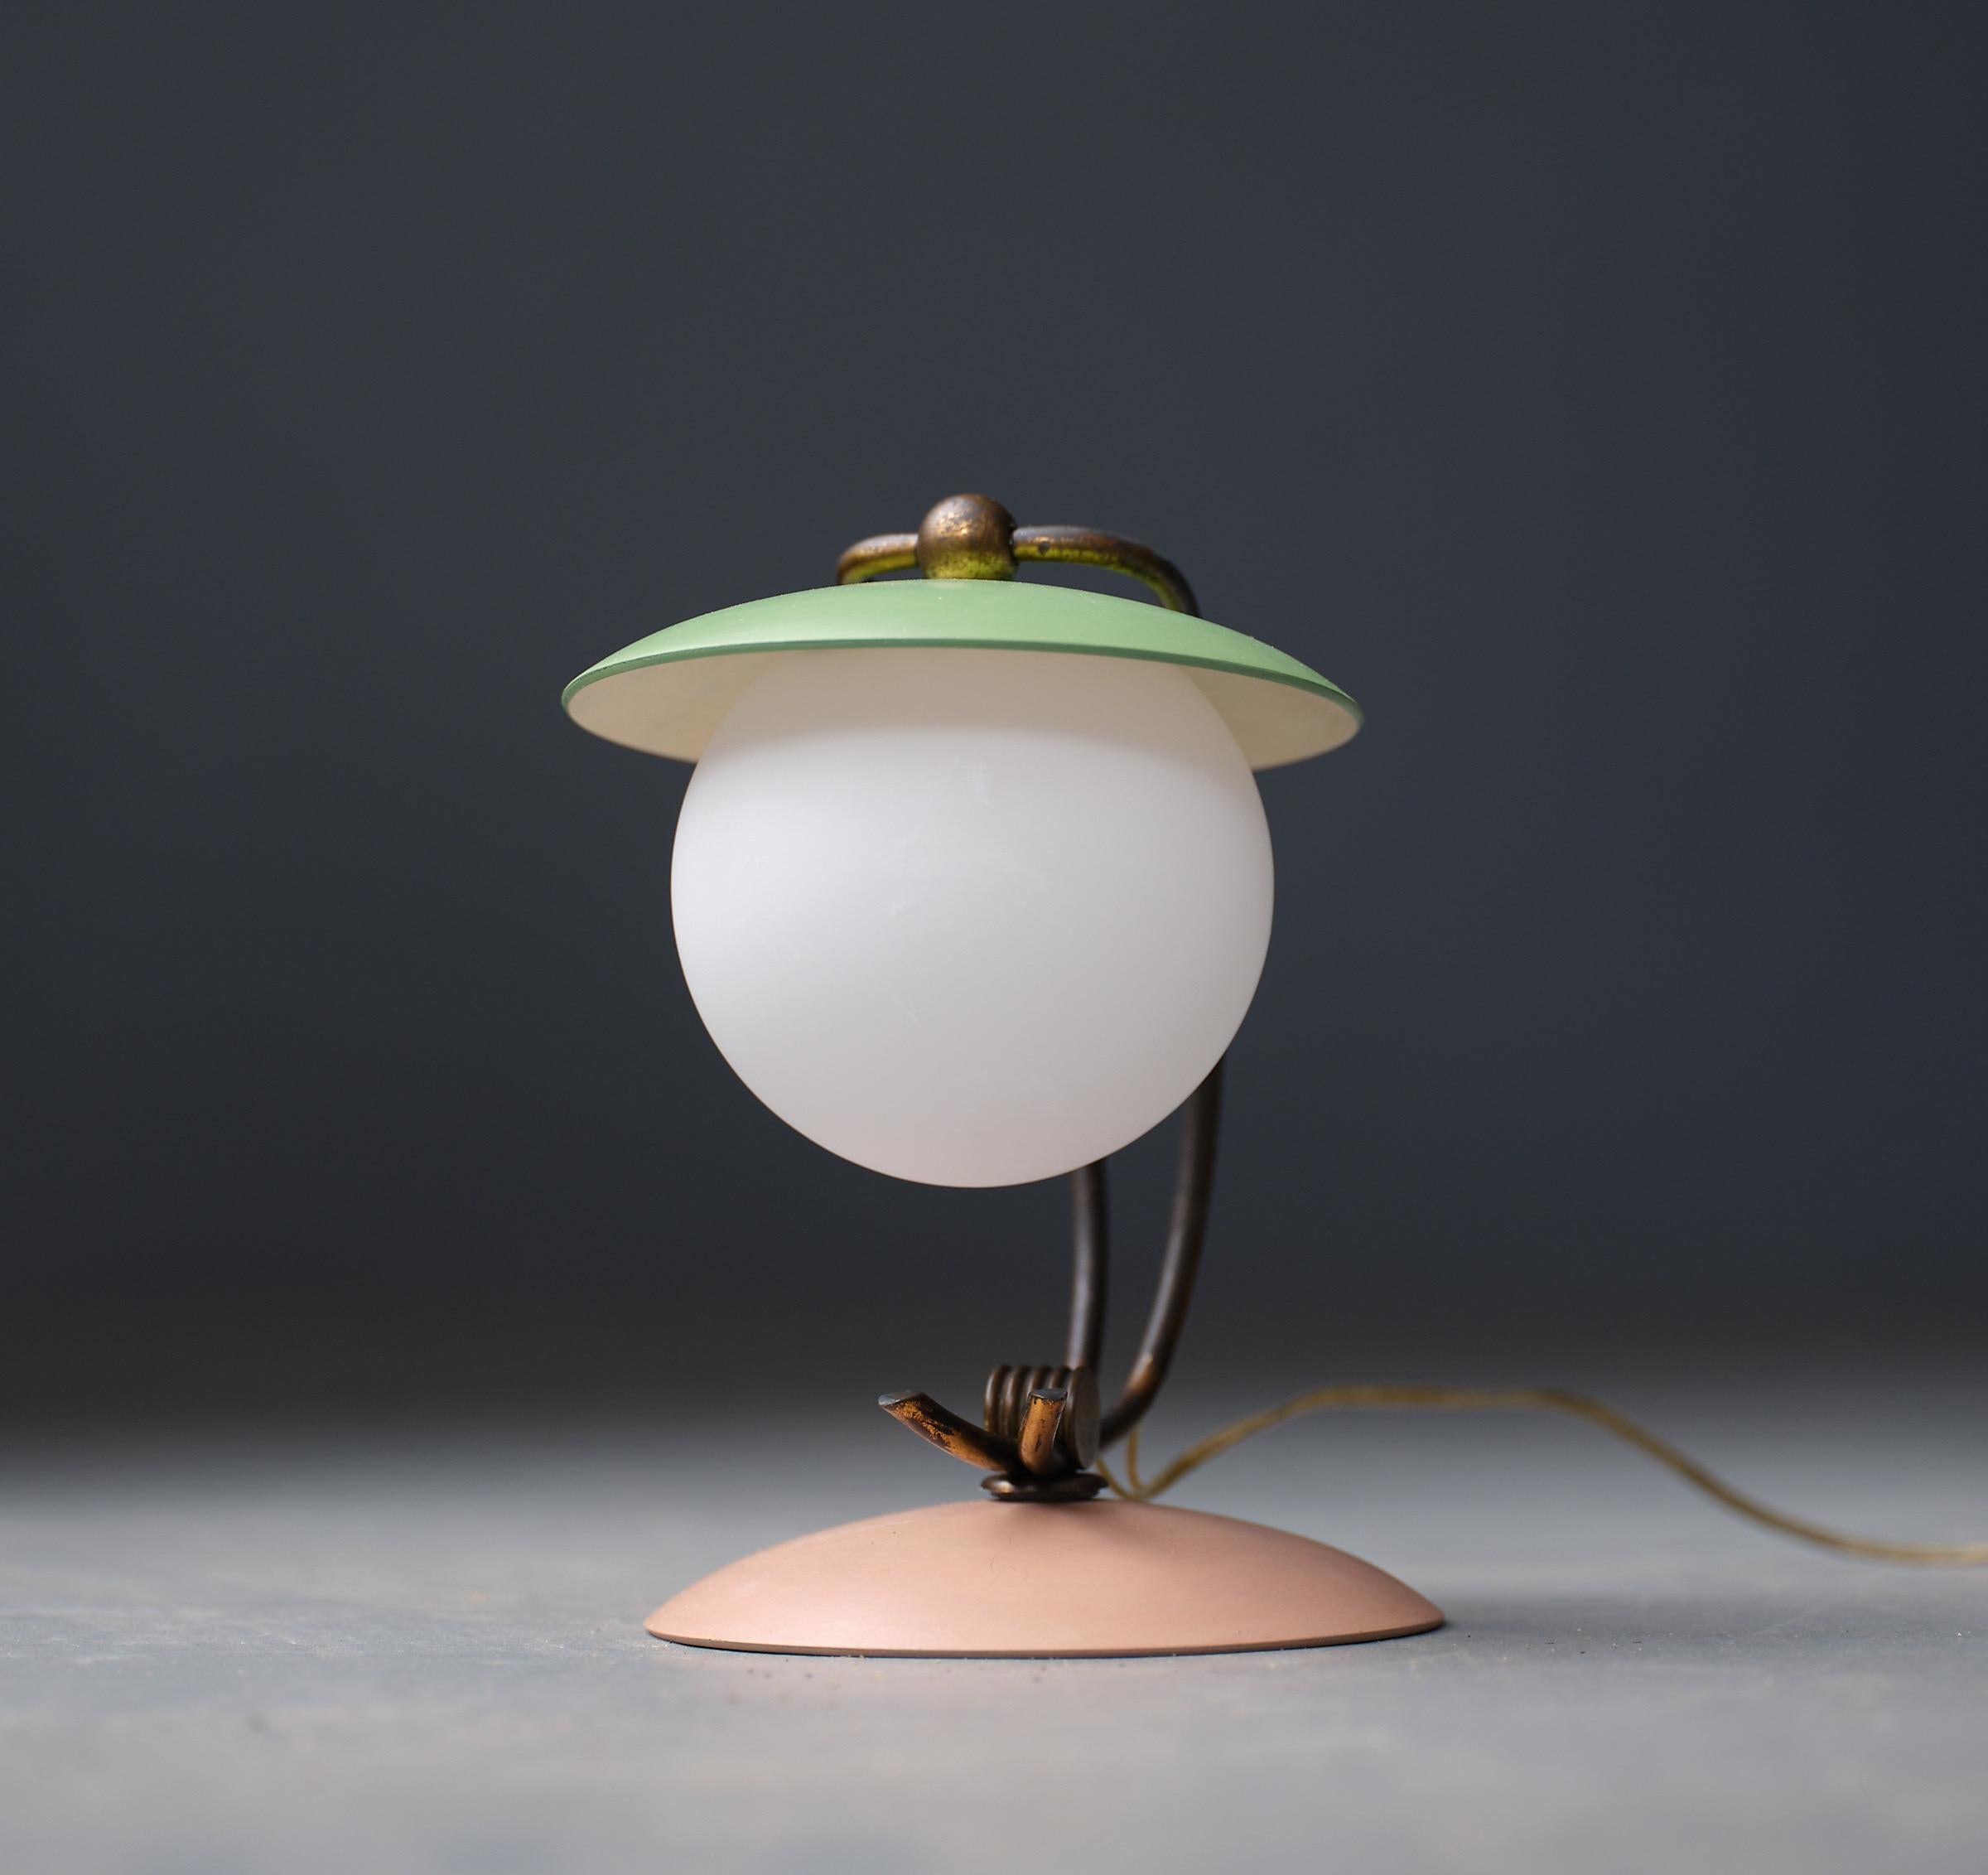 Presenting a delightful 1950s Italian table lamp, a testament to the timeless elegance and innovation of mid-century design. This piece beautifully marries aged brass with vibrant enamel accents in pink and green, capturing the playful yet